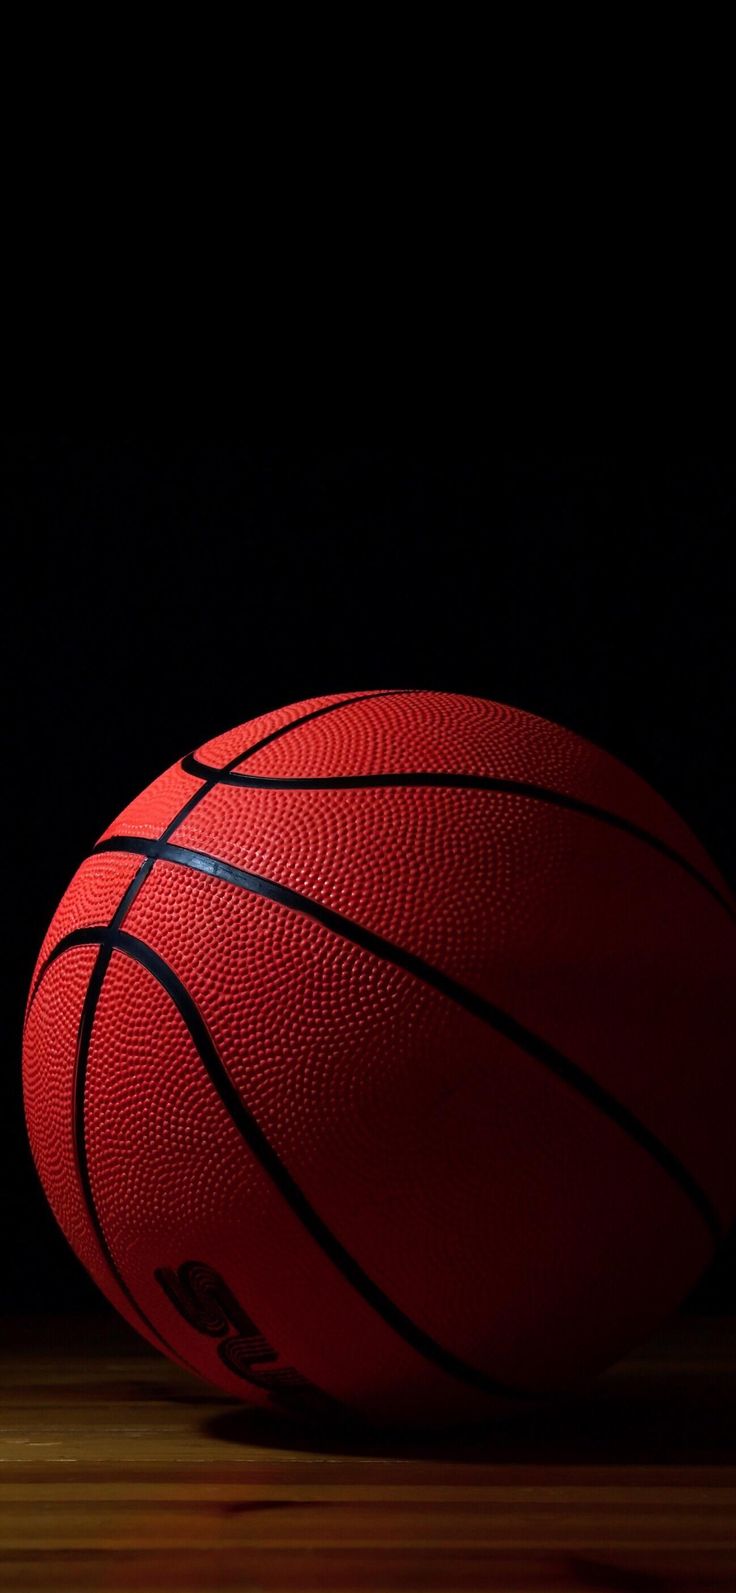 Iphone Wallpapers - Basketball Wallpaper For Iphone X Hd - HD Wallpaper 